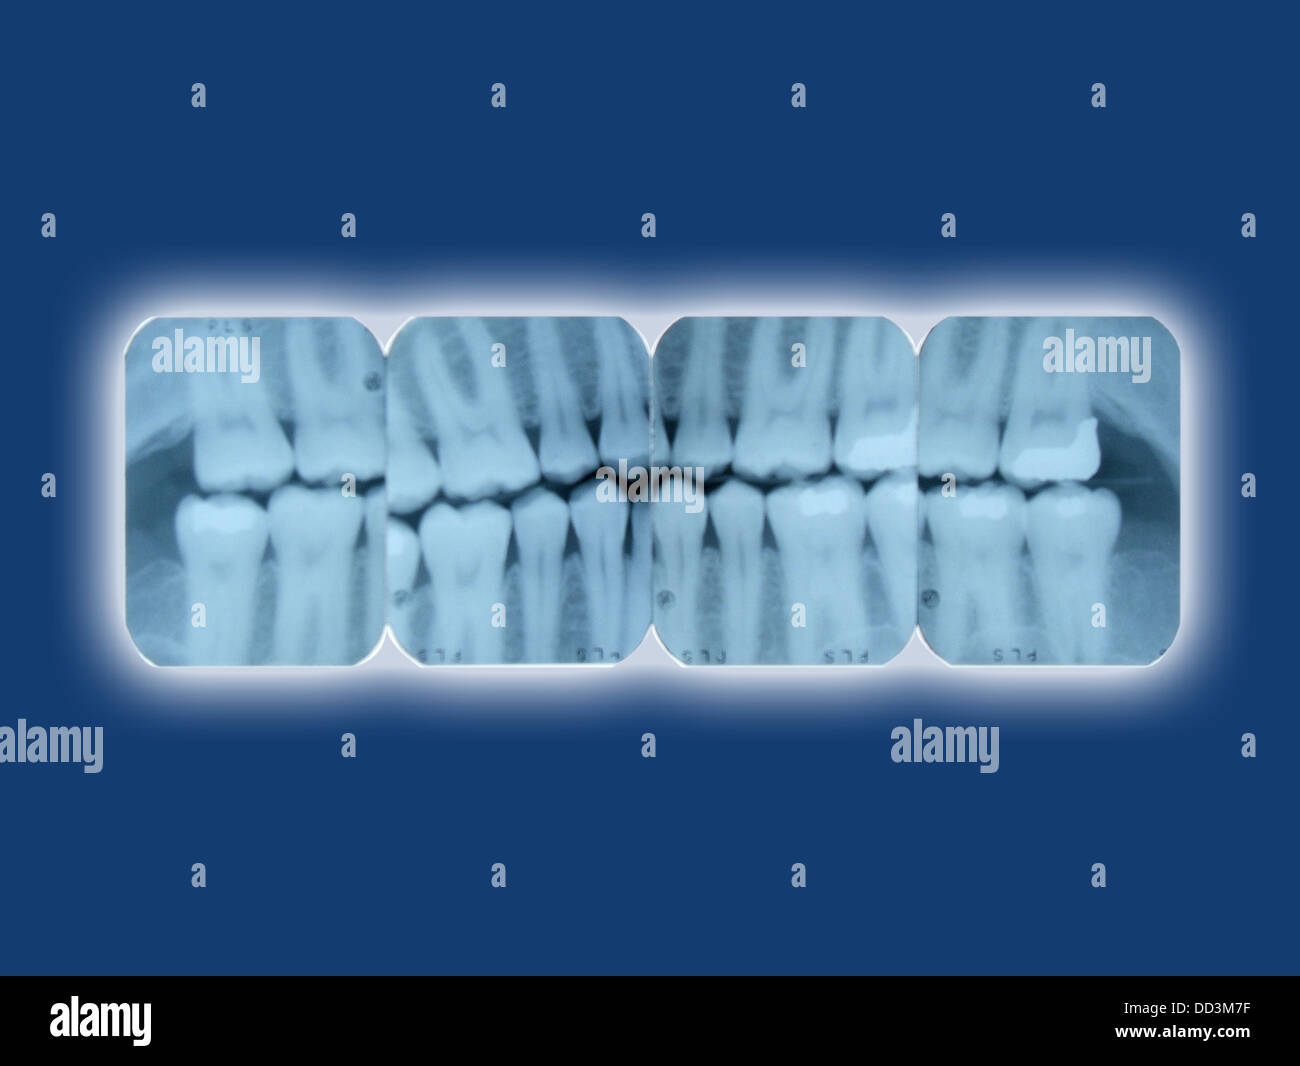 Dental x-ray sheets glowing on a blue background Stock Photo